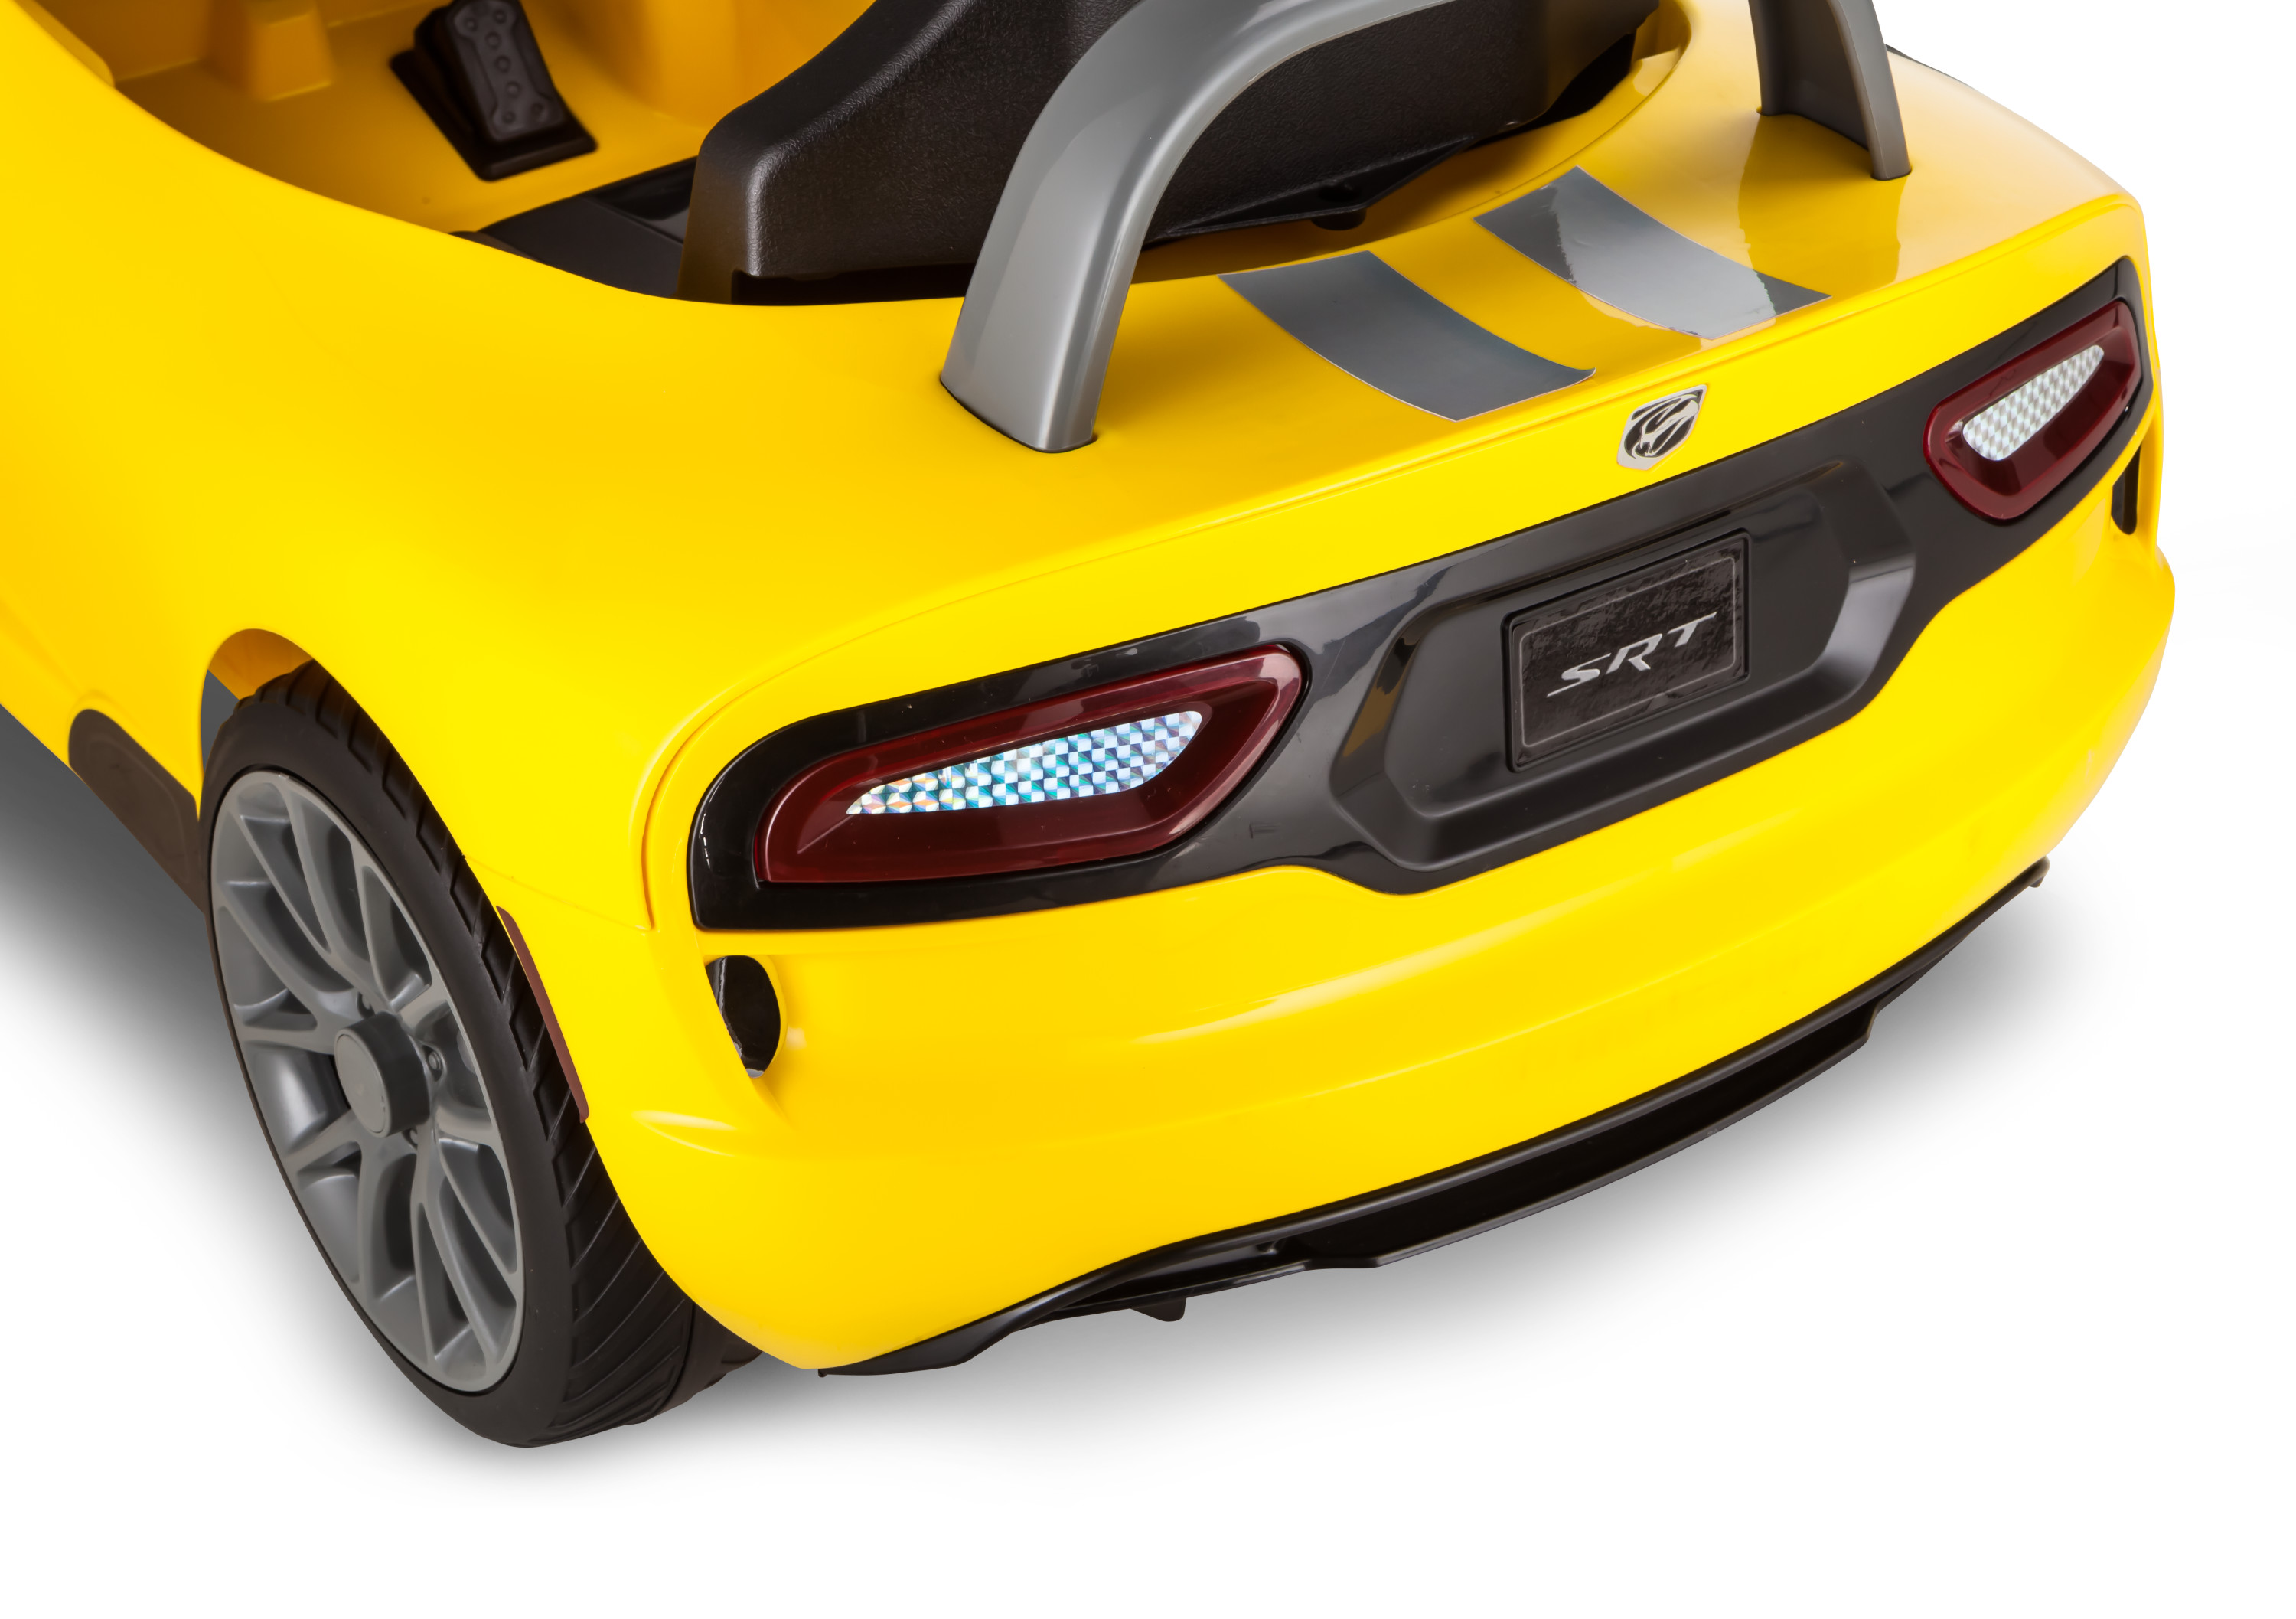 Dodge Viper SRT, 6-Volt Ride-On Toy by Kid Trax, single passenger, yellow - image 3 of 4